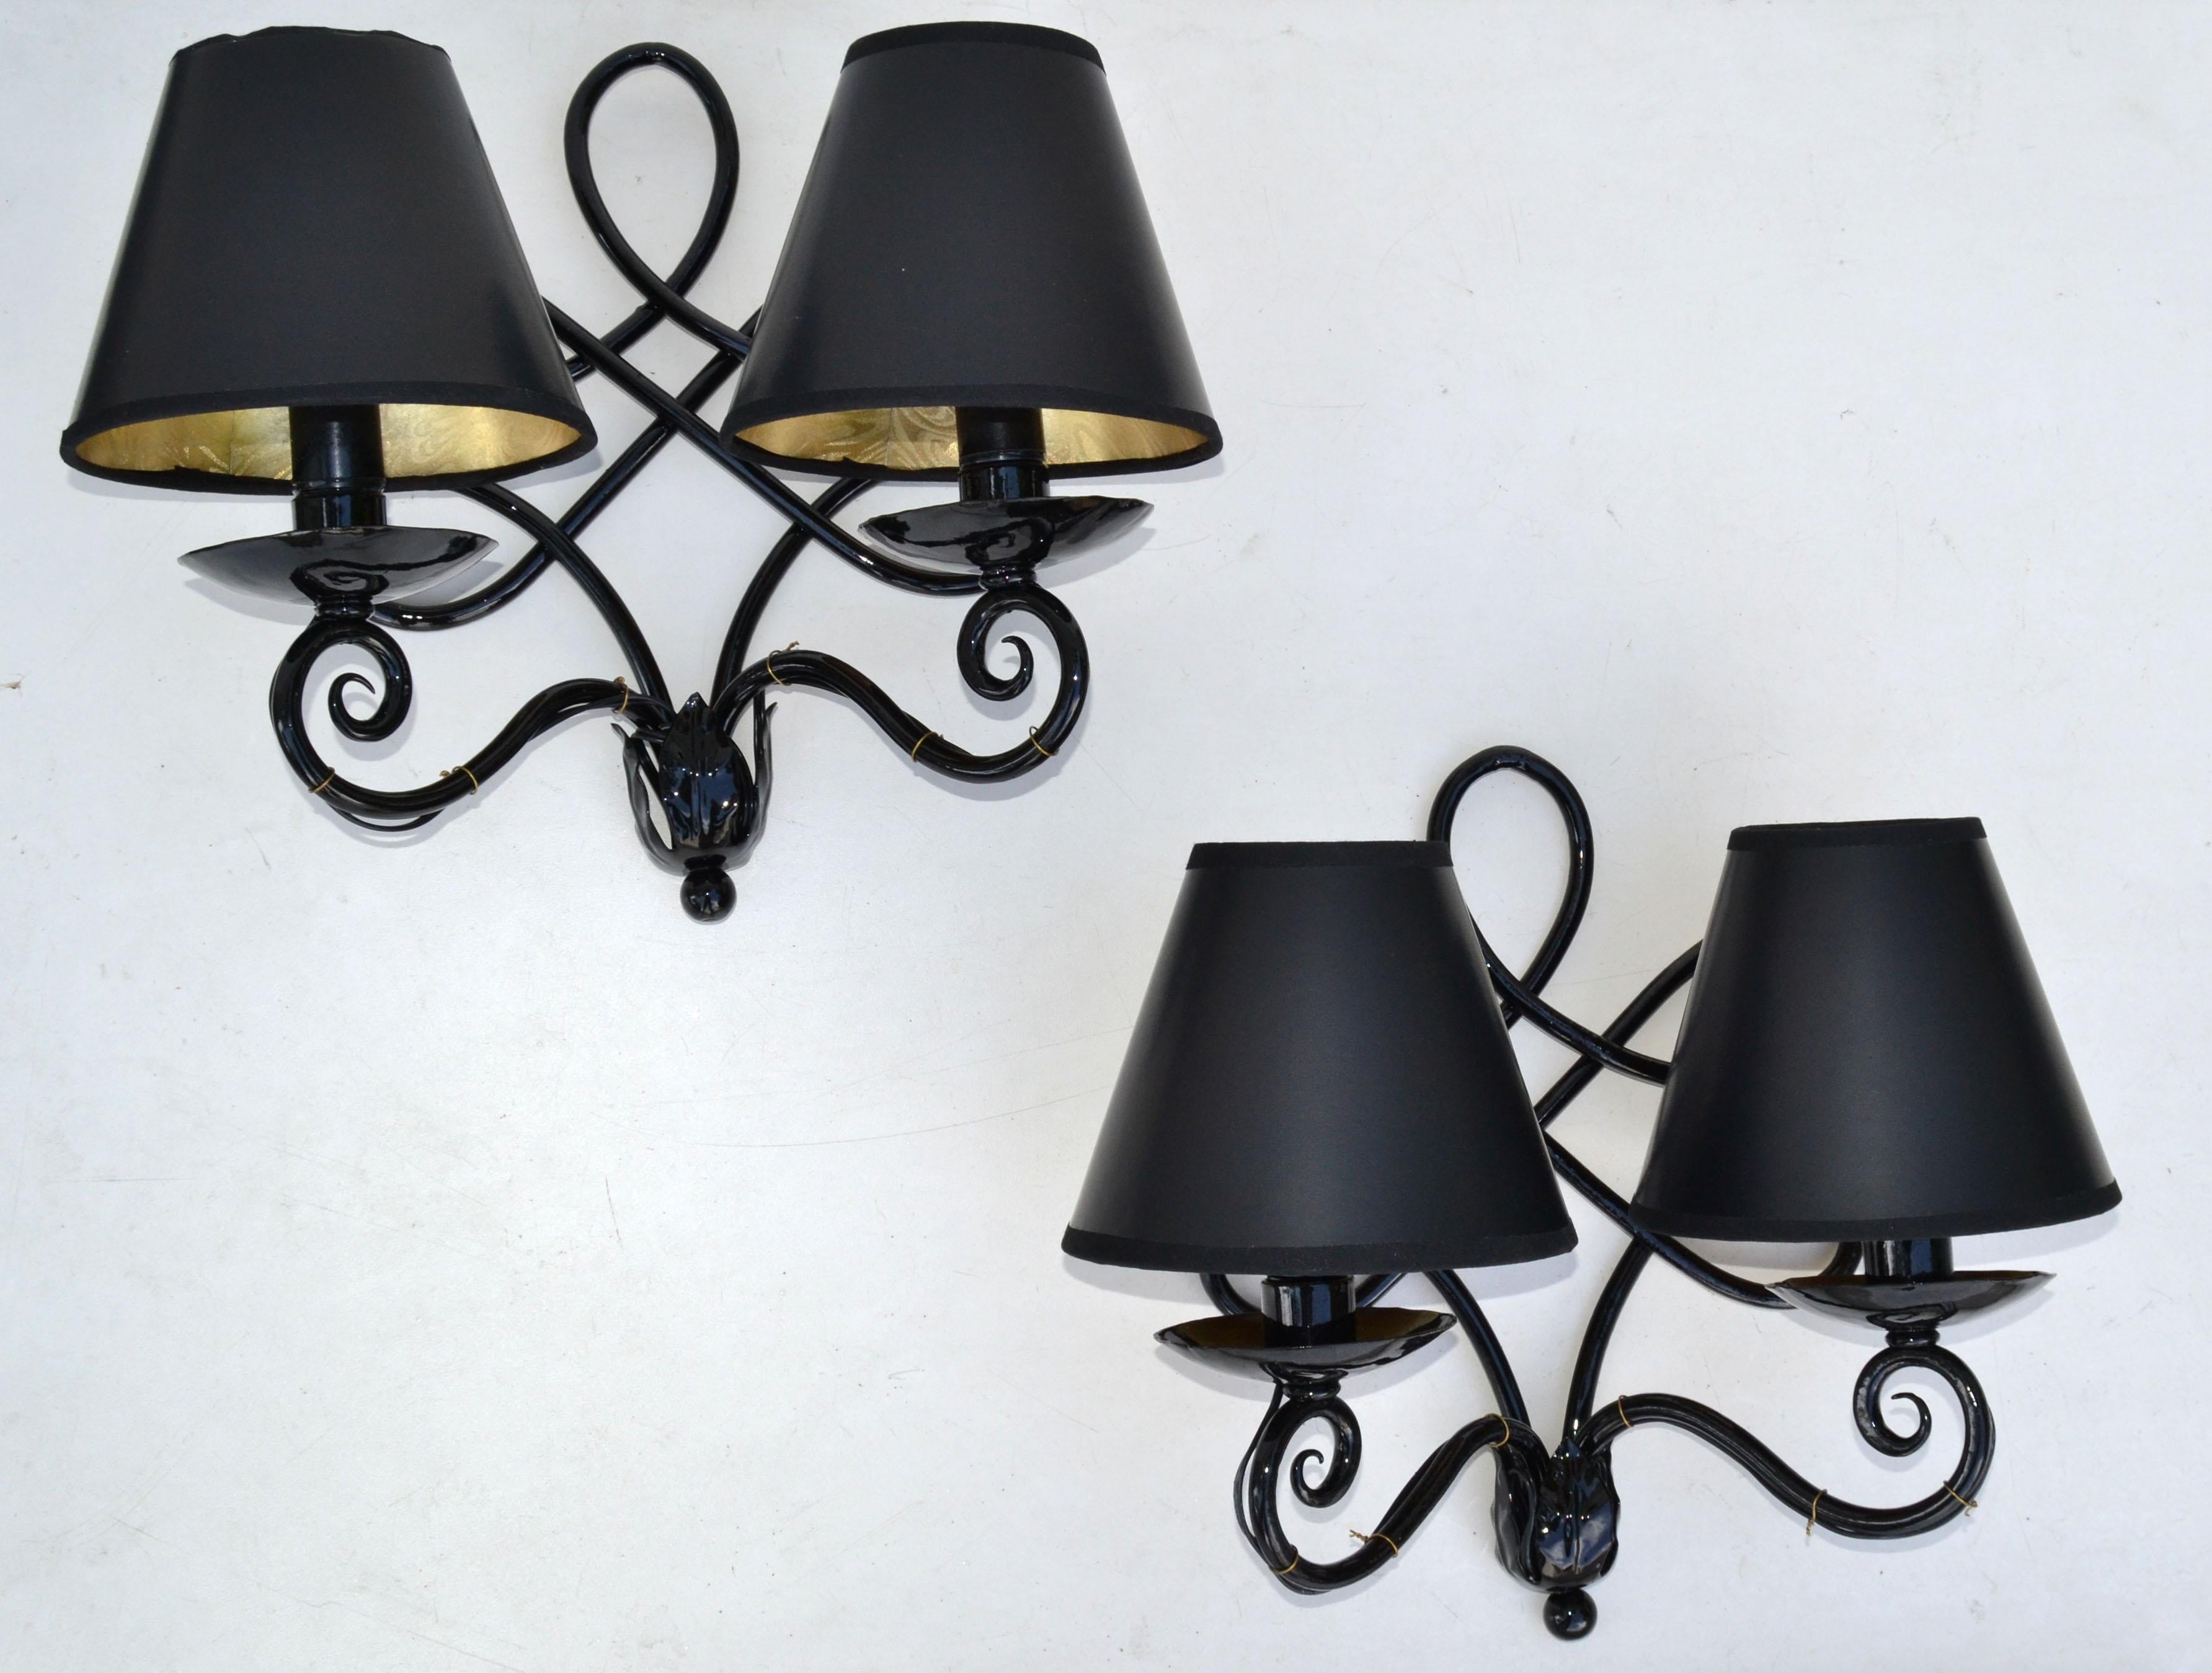 1940 French 2 Lights Wrought Iron Wall Sconces Black Gloss Finish Art Deco, Pair 1